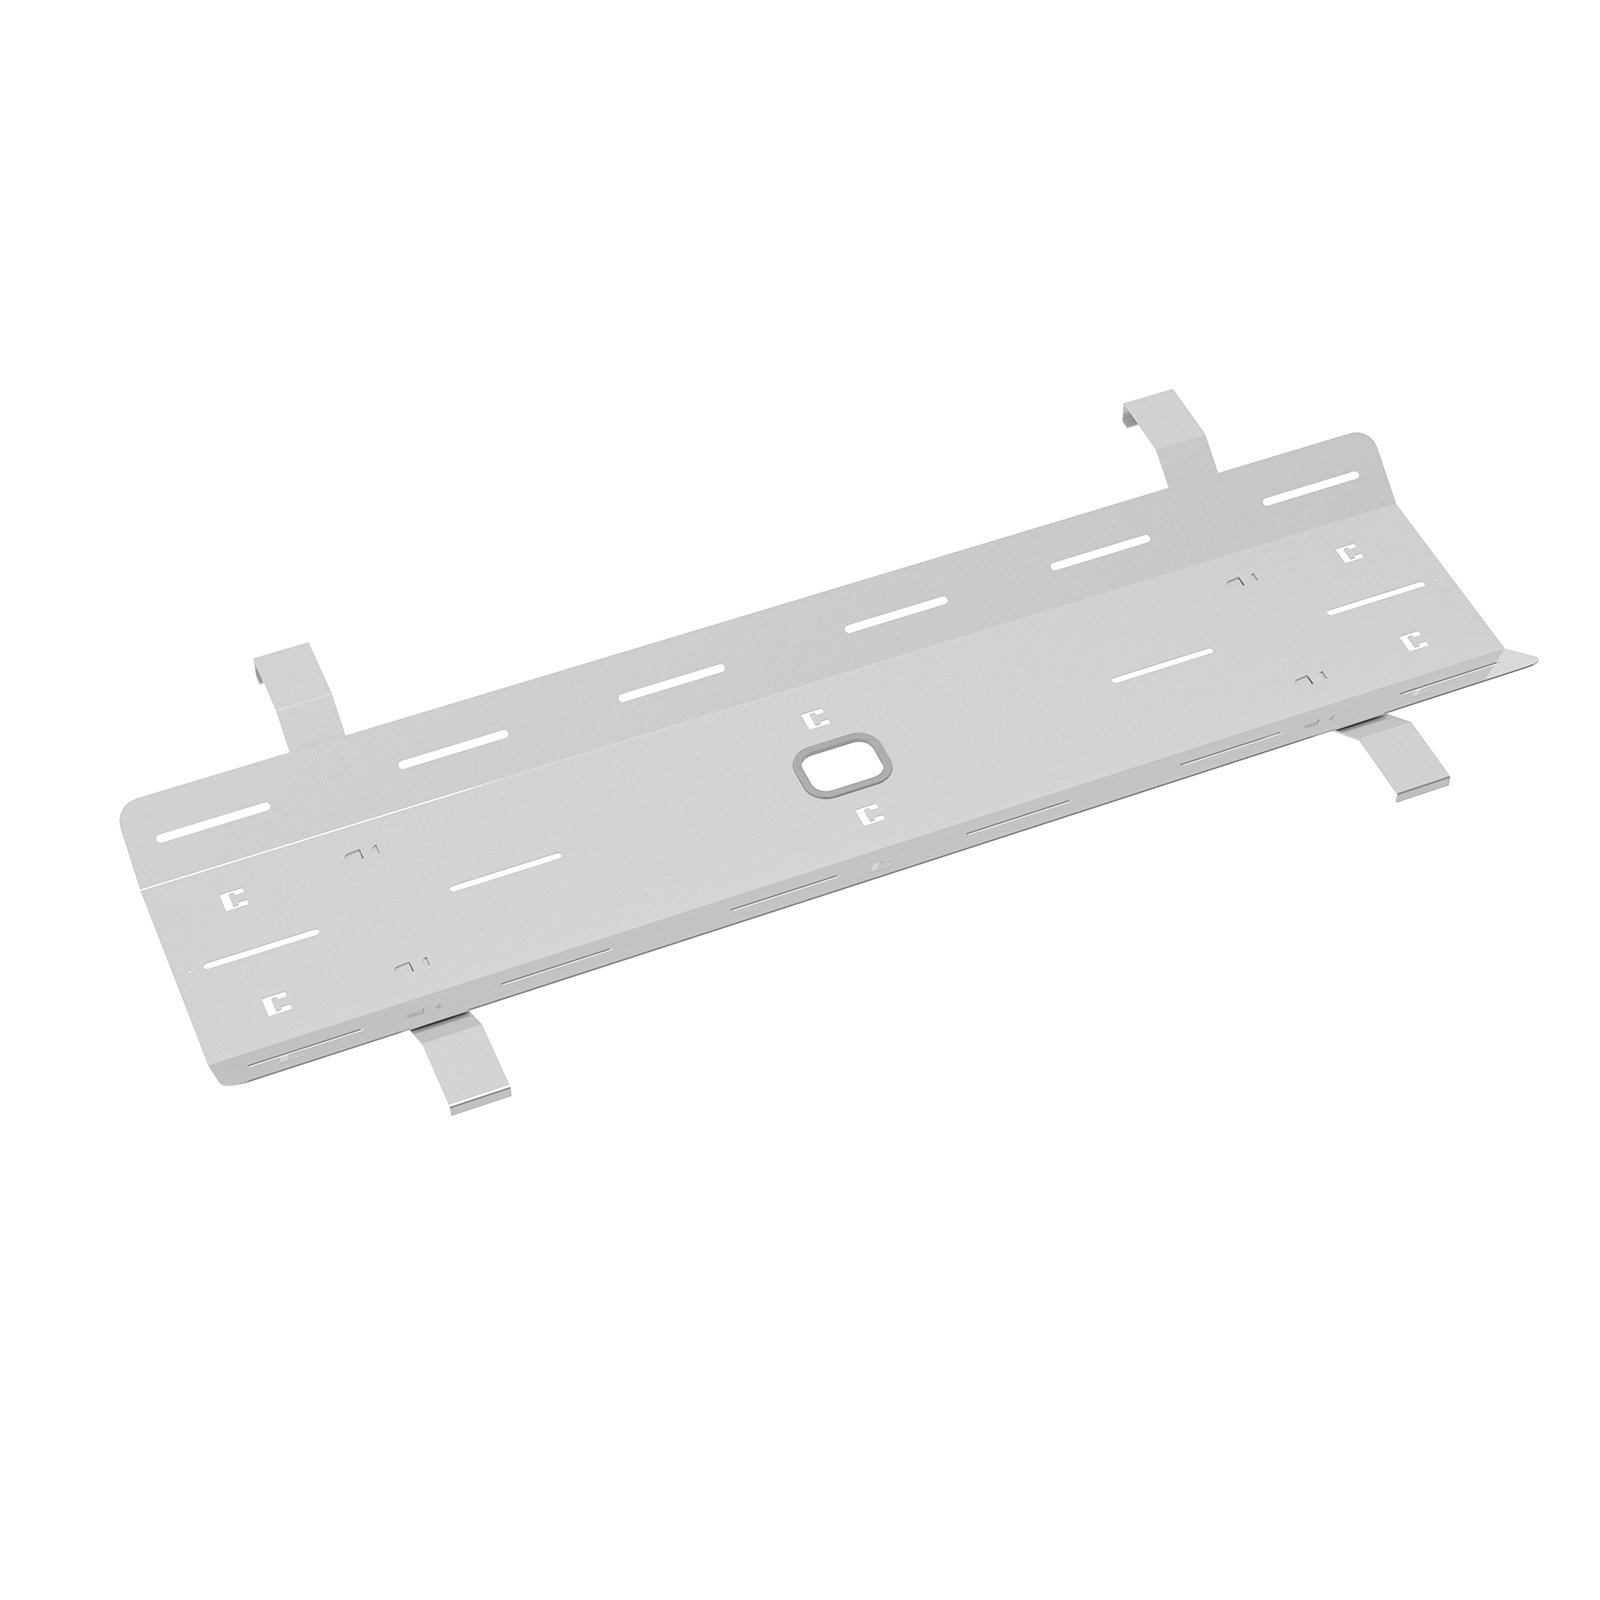 Double Drop Down Cable Tray Bracket For Adapt And Fuze Desks